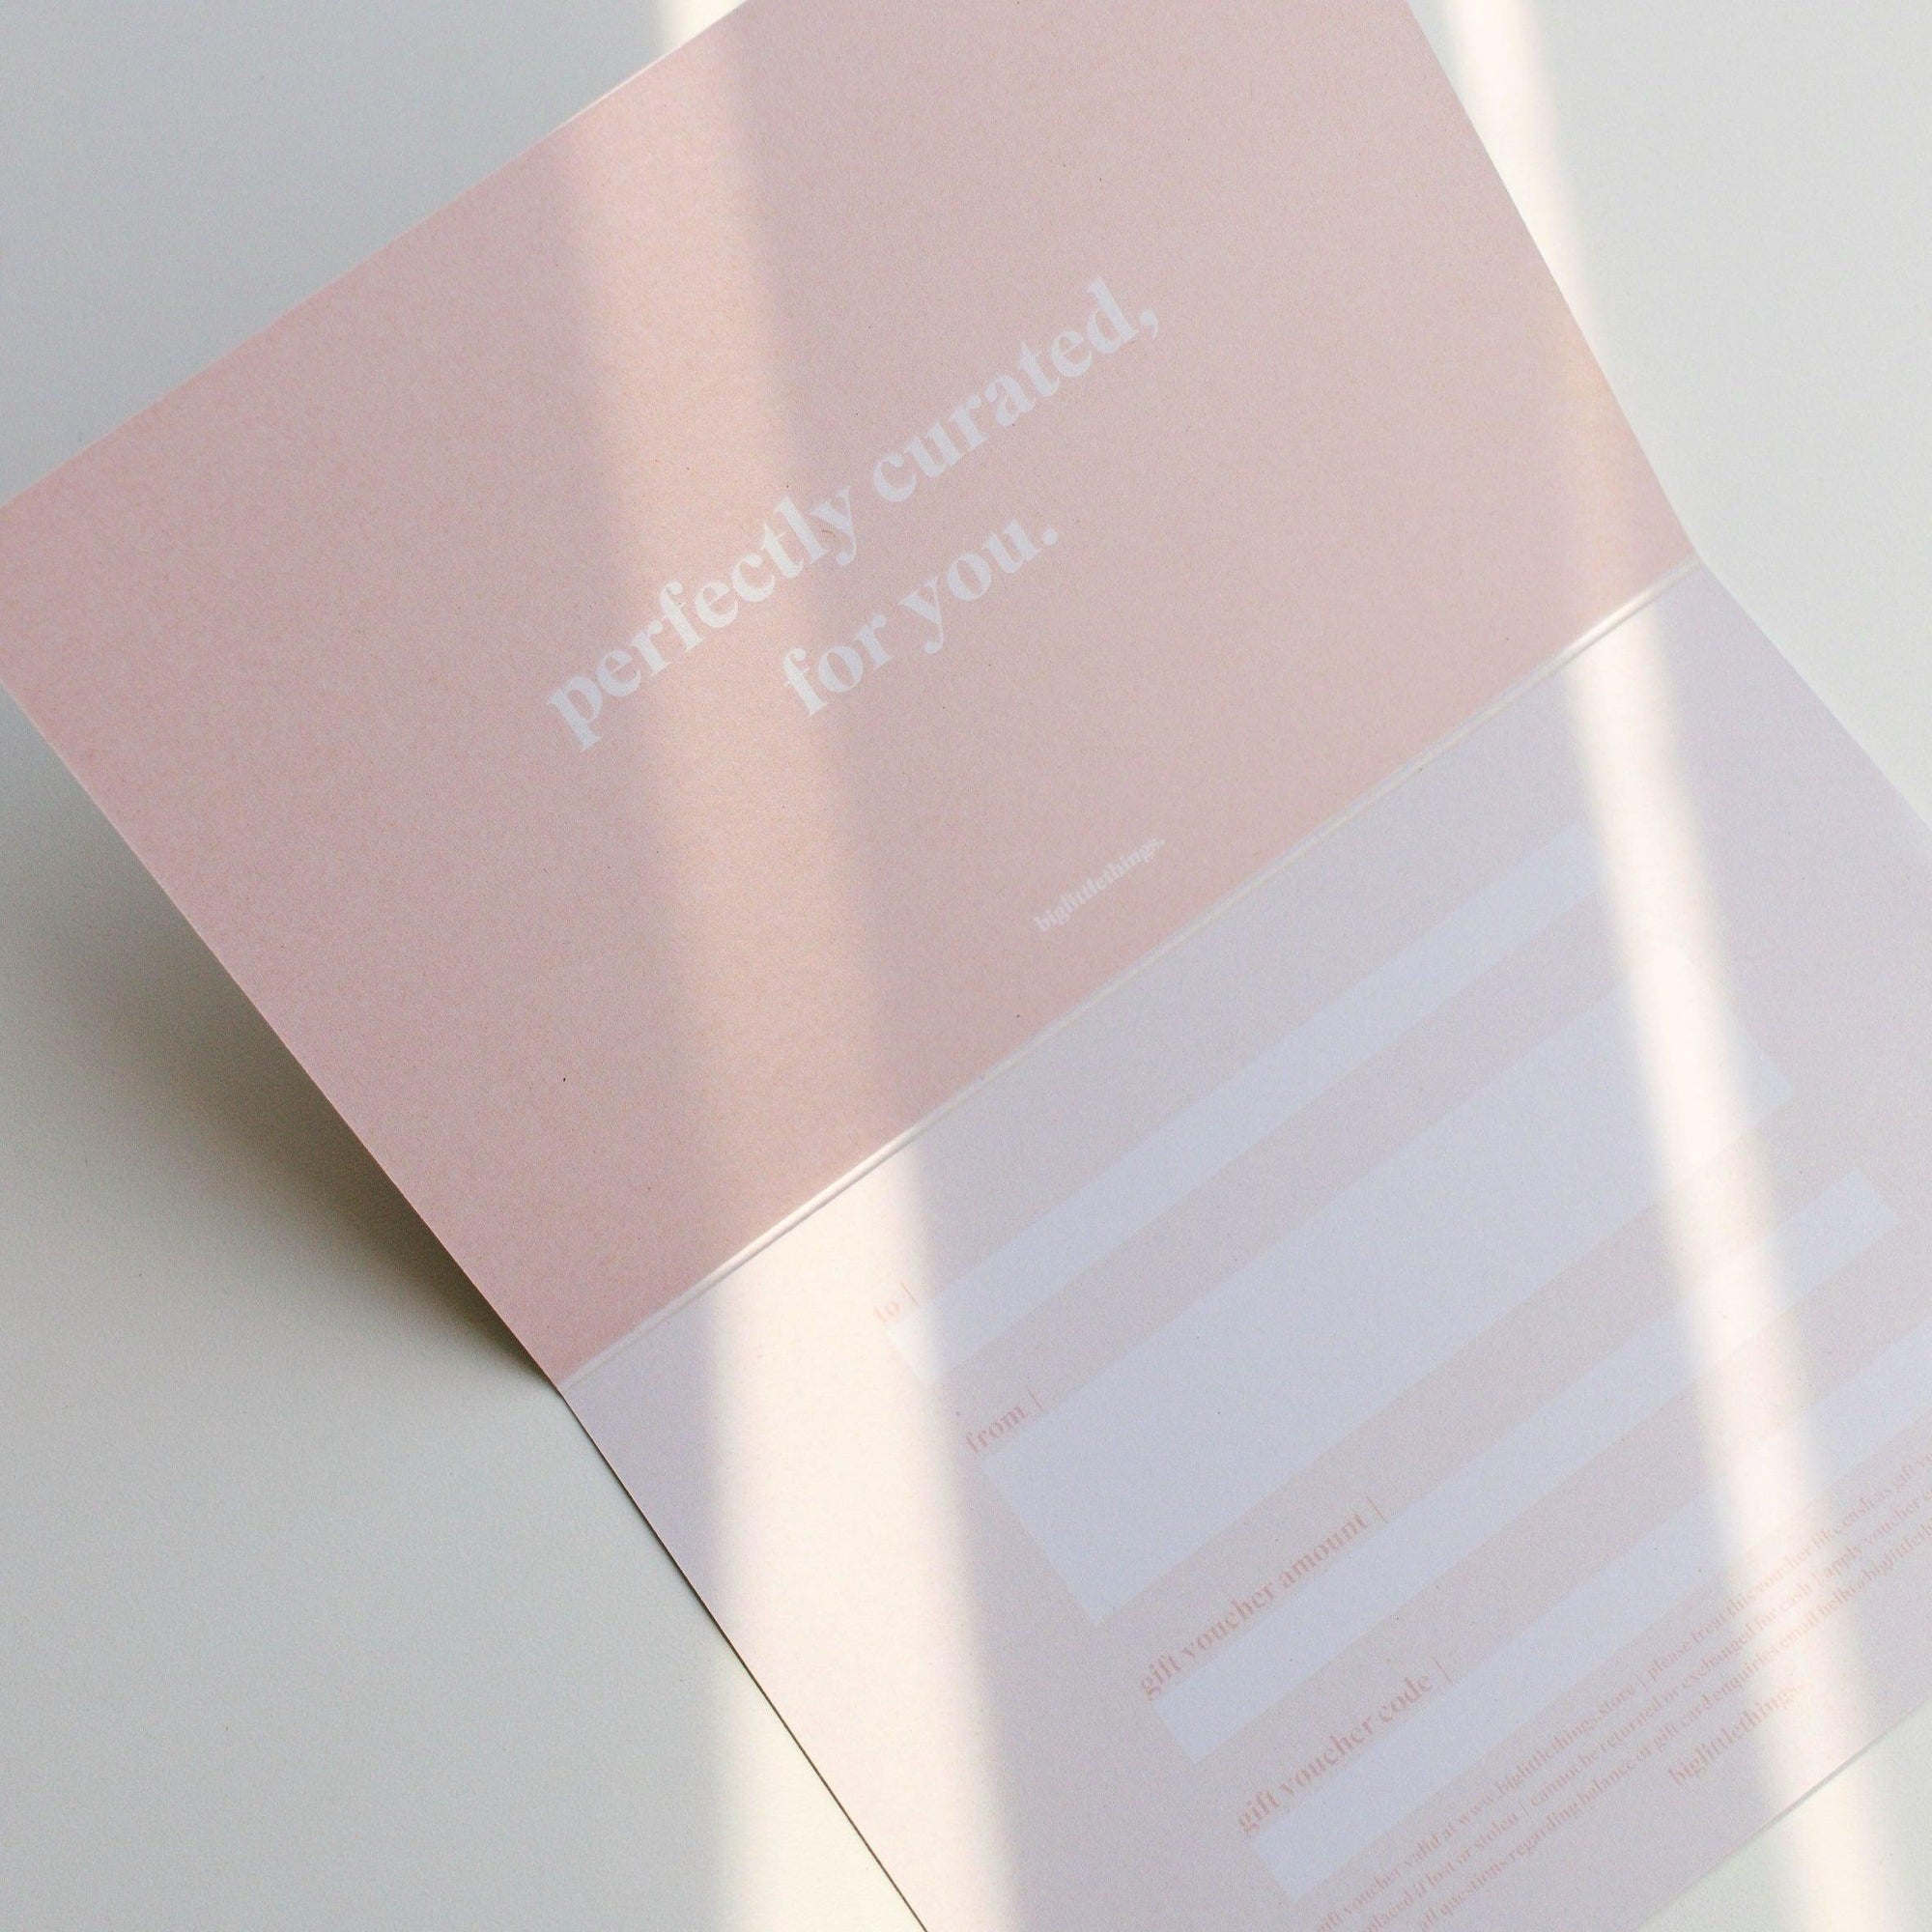 A perfectly prepared pink envelope containing a biglittlethings gift voucher.